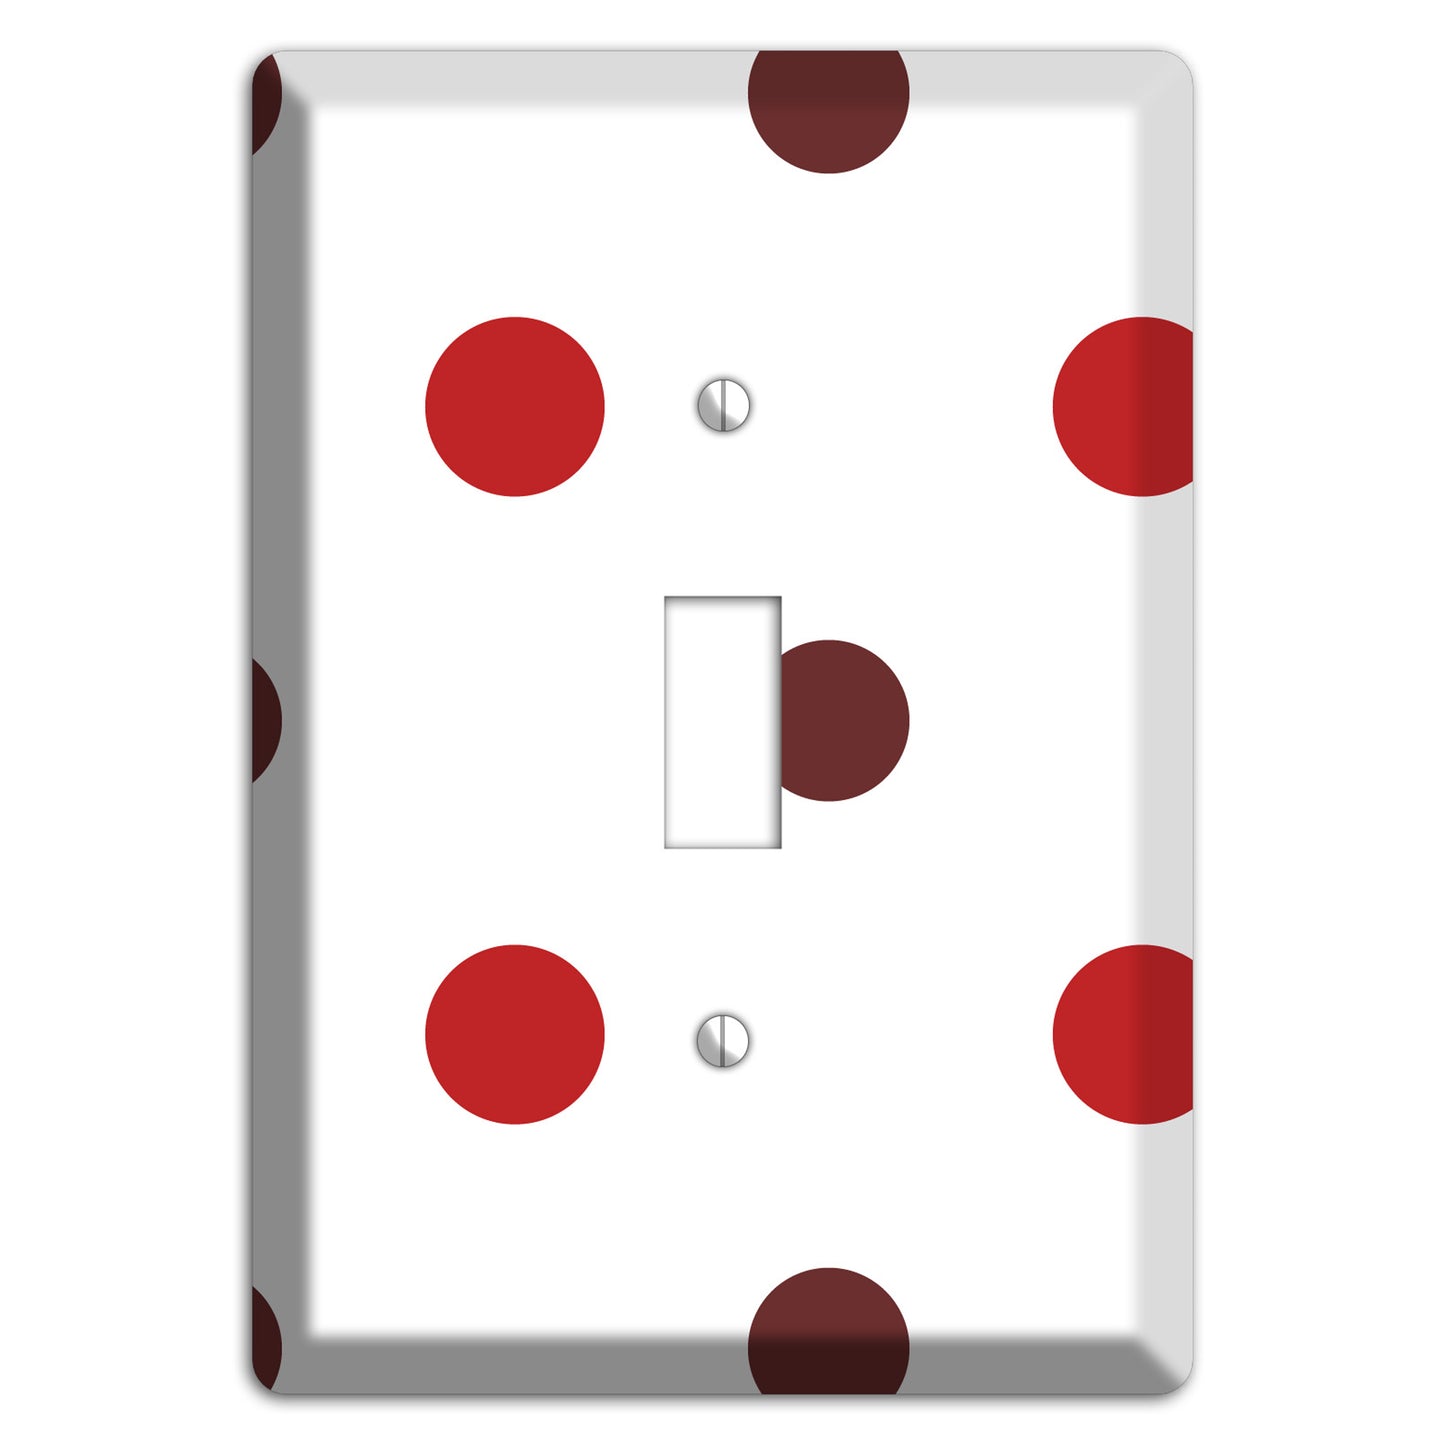 Red and Brown Medium Polka Dots Cover Plates